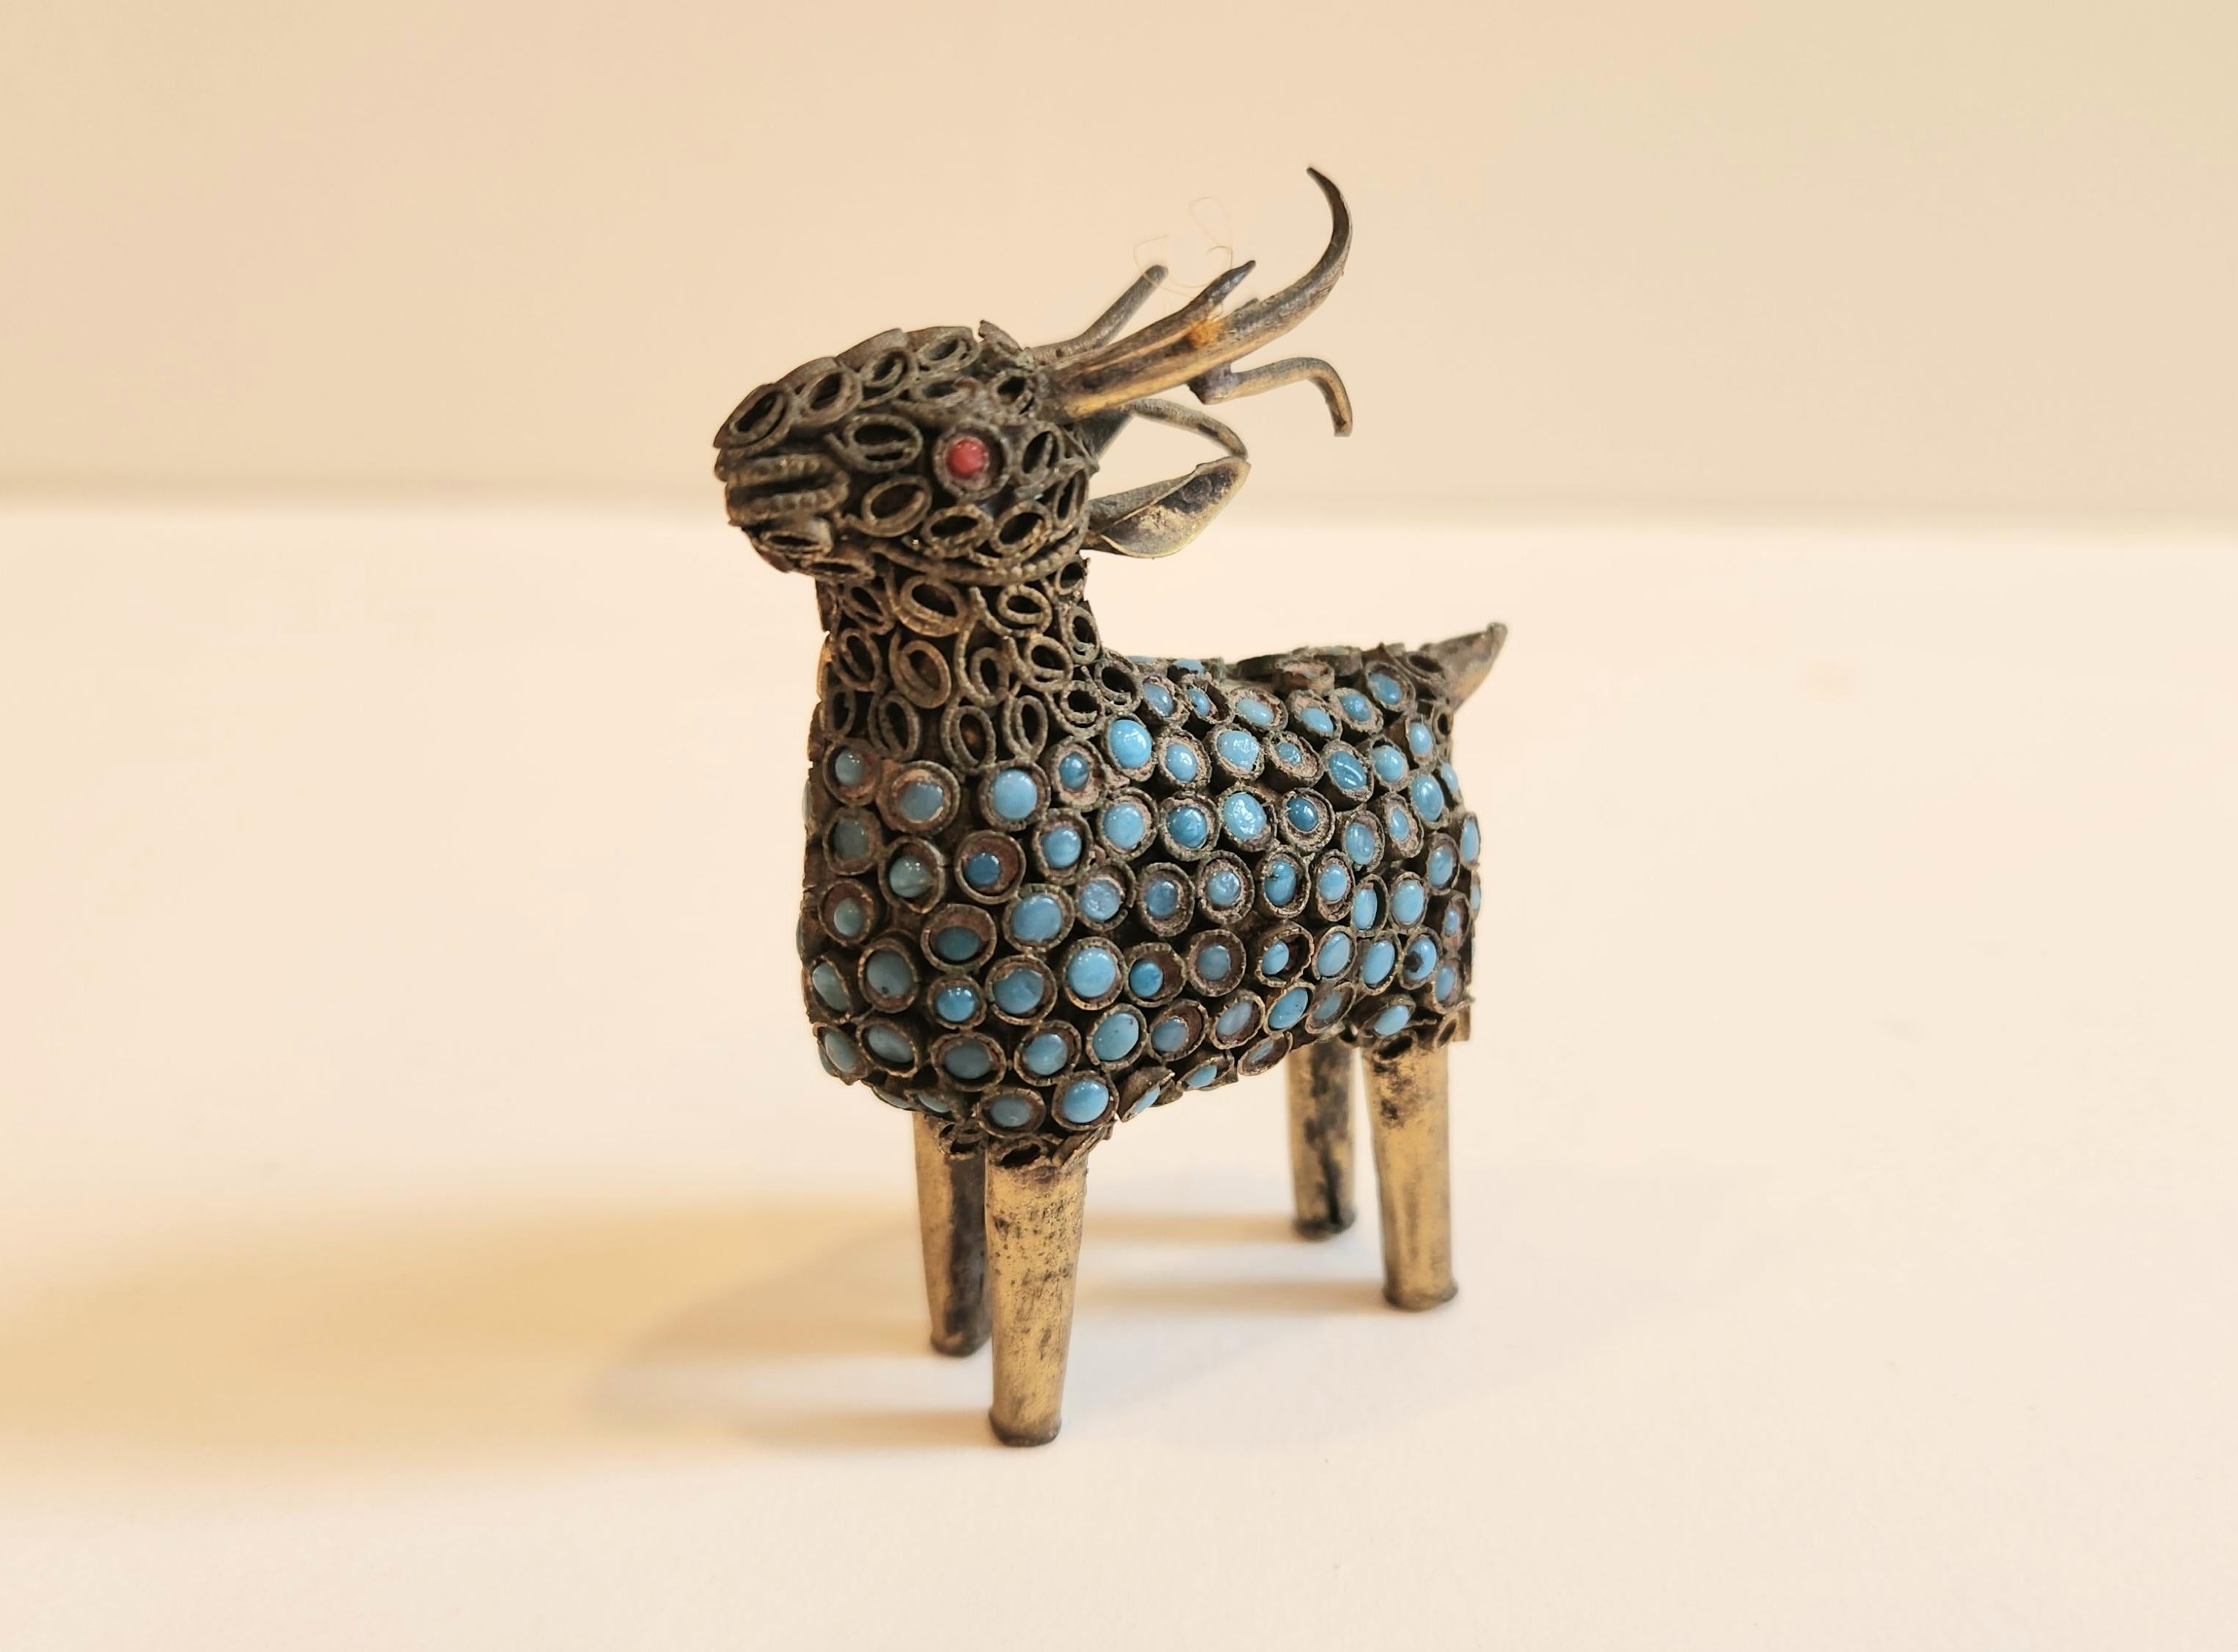 Unknown Figurative Sculpture - Turquoise and Coral Ram from Nepal